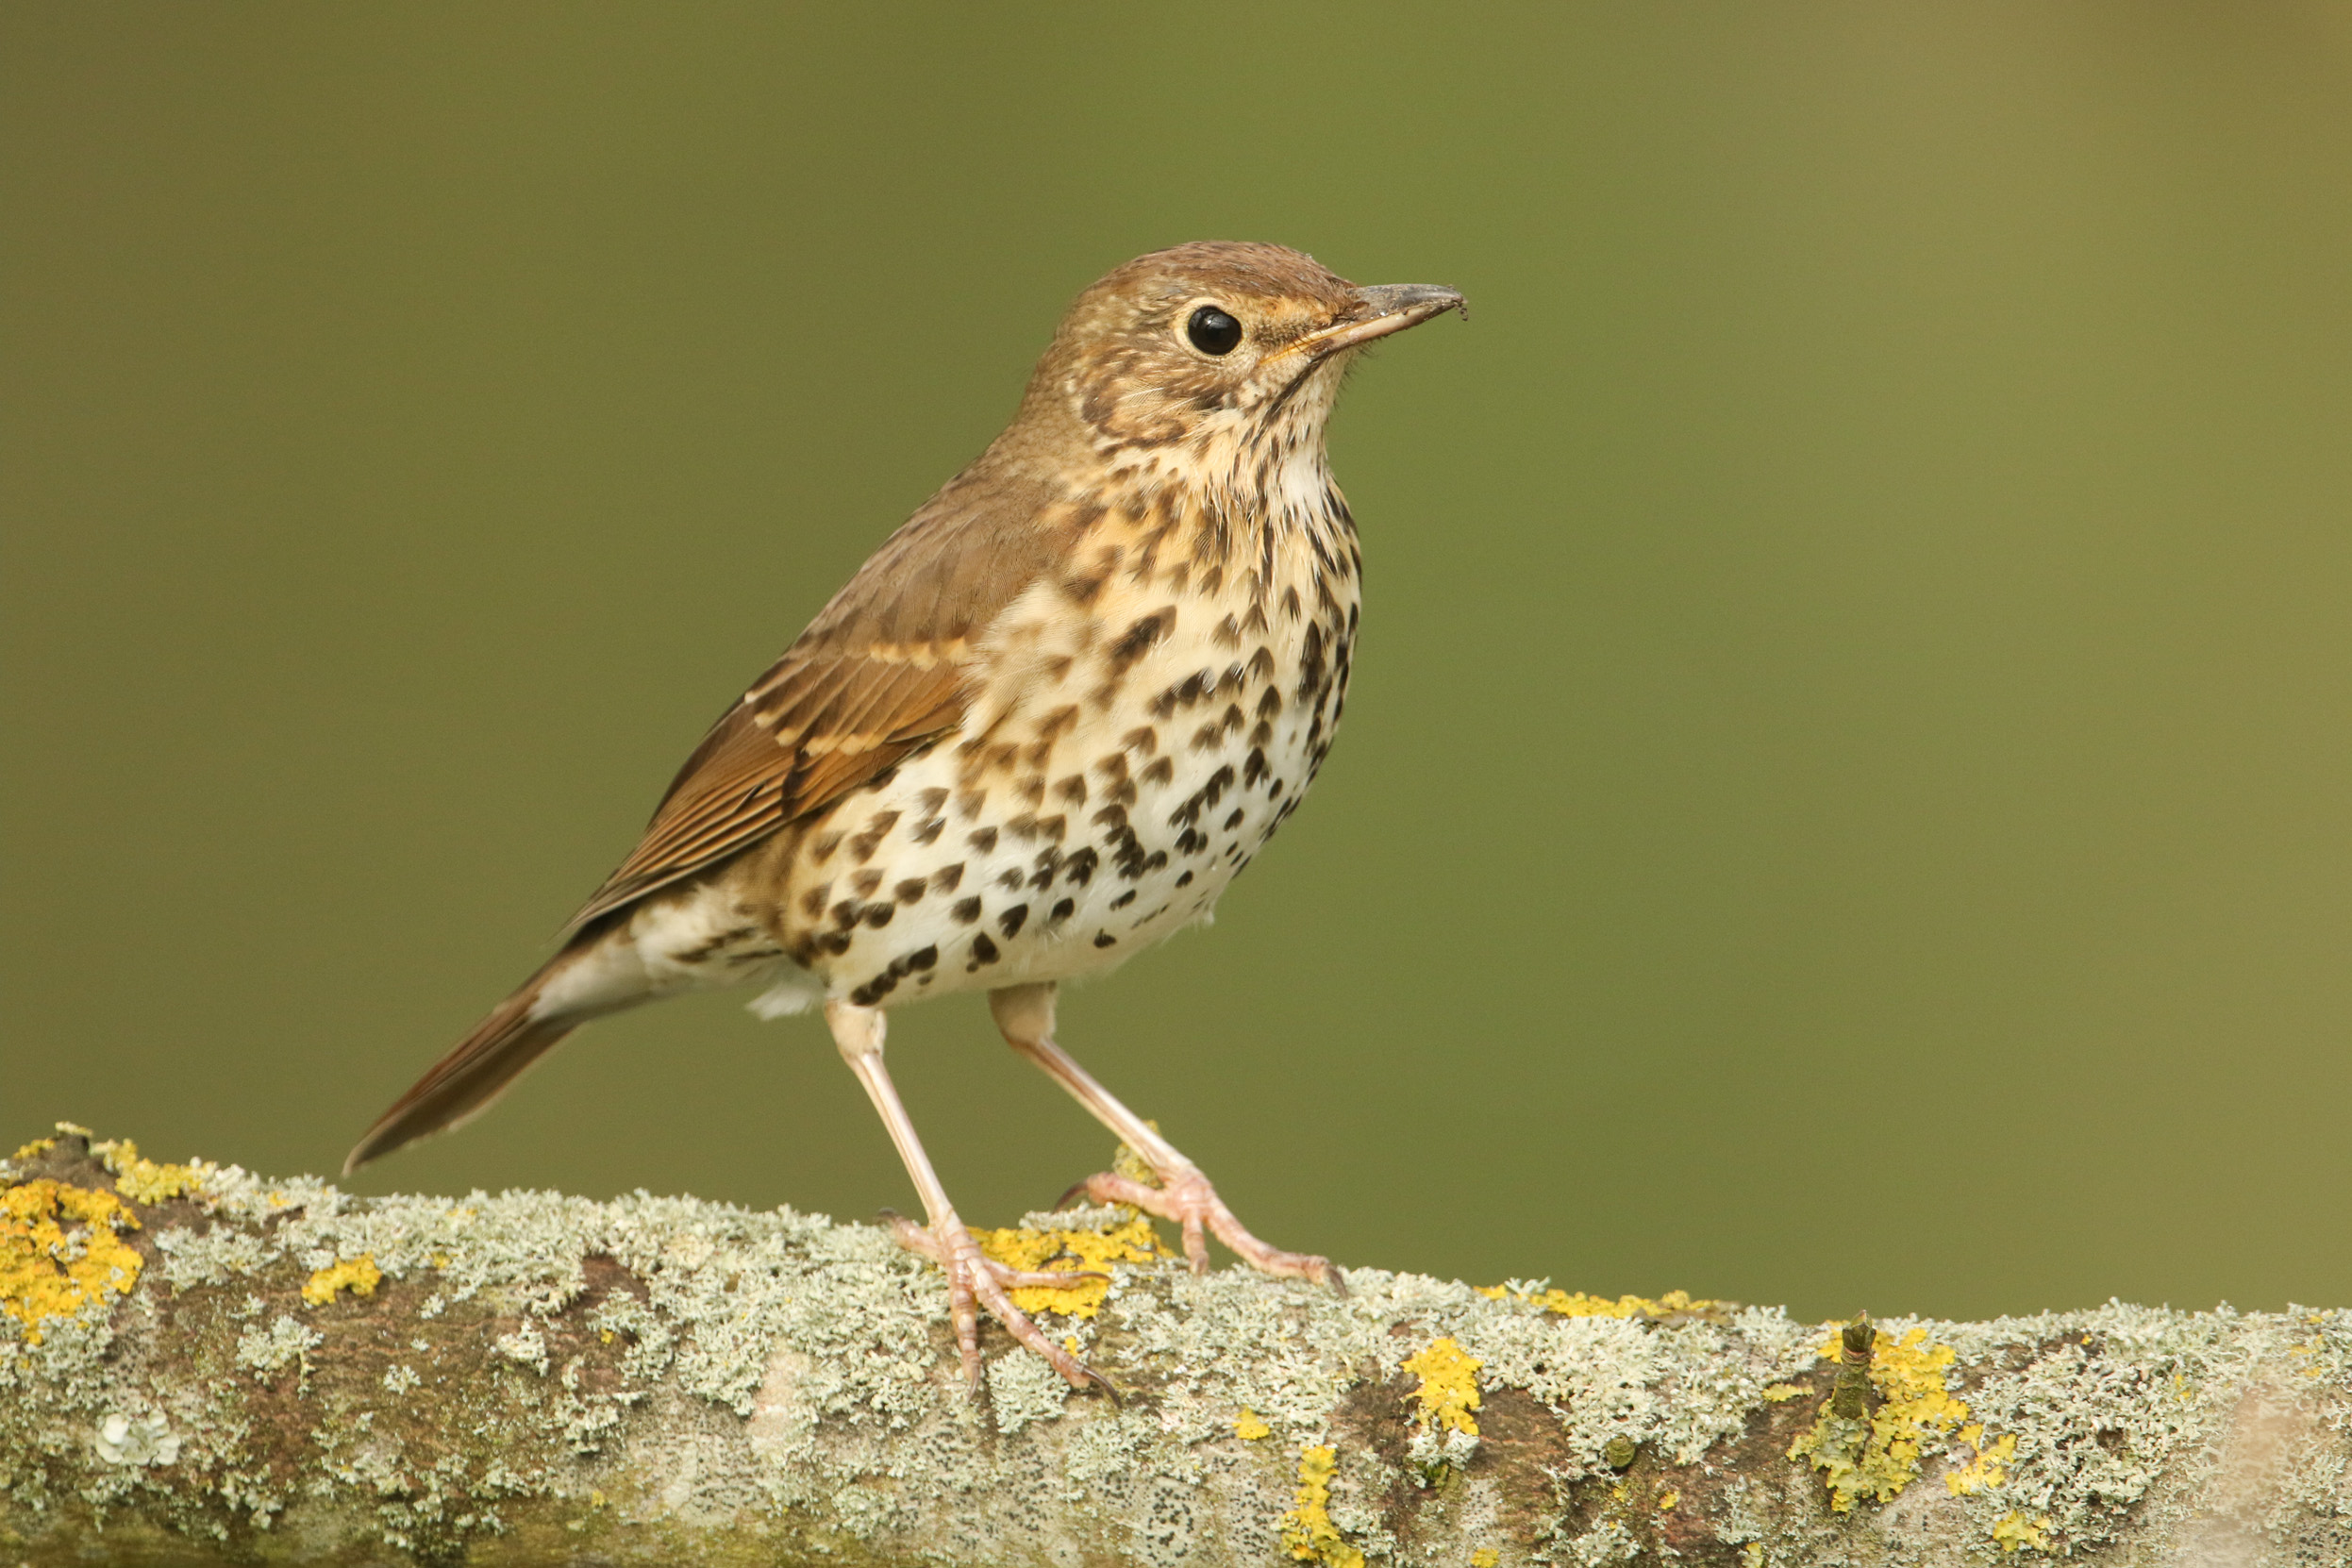 A lone Song Thrush perched on a moss covered branch.